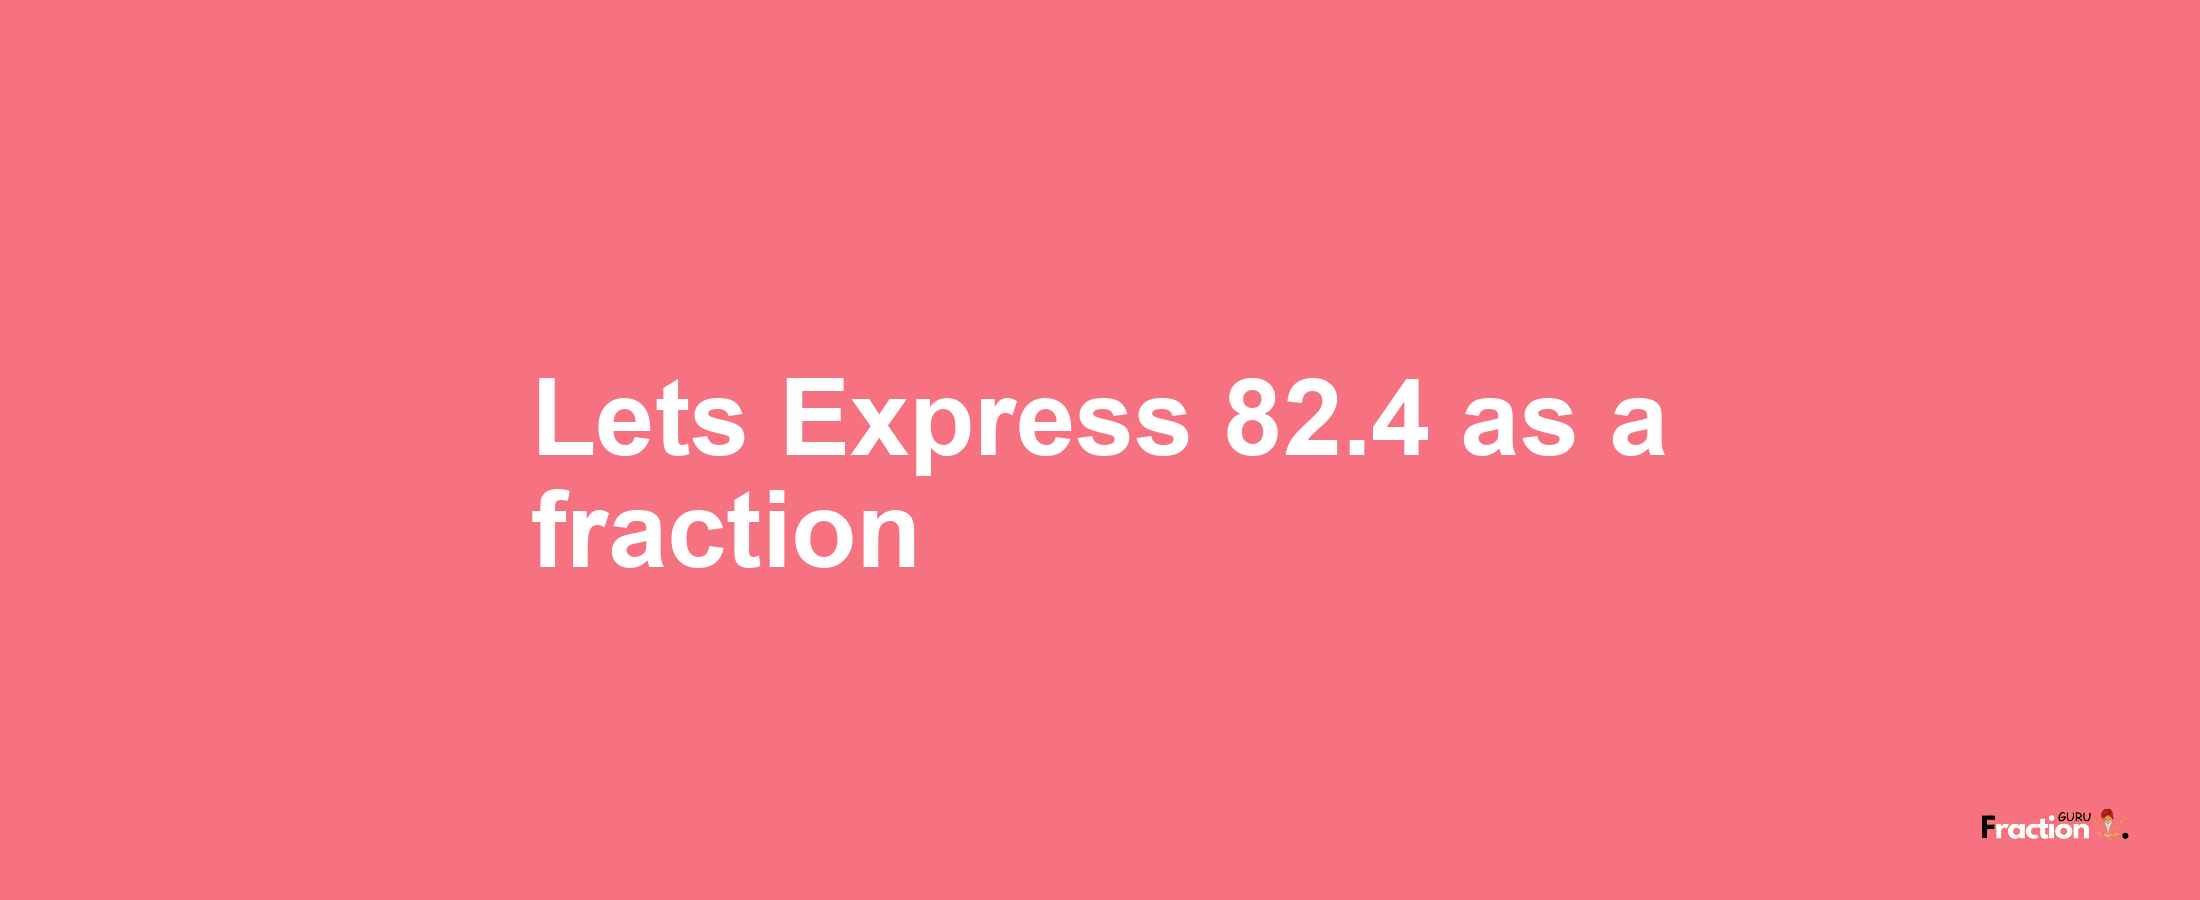 Lets Express 82.4 as afraction